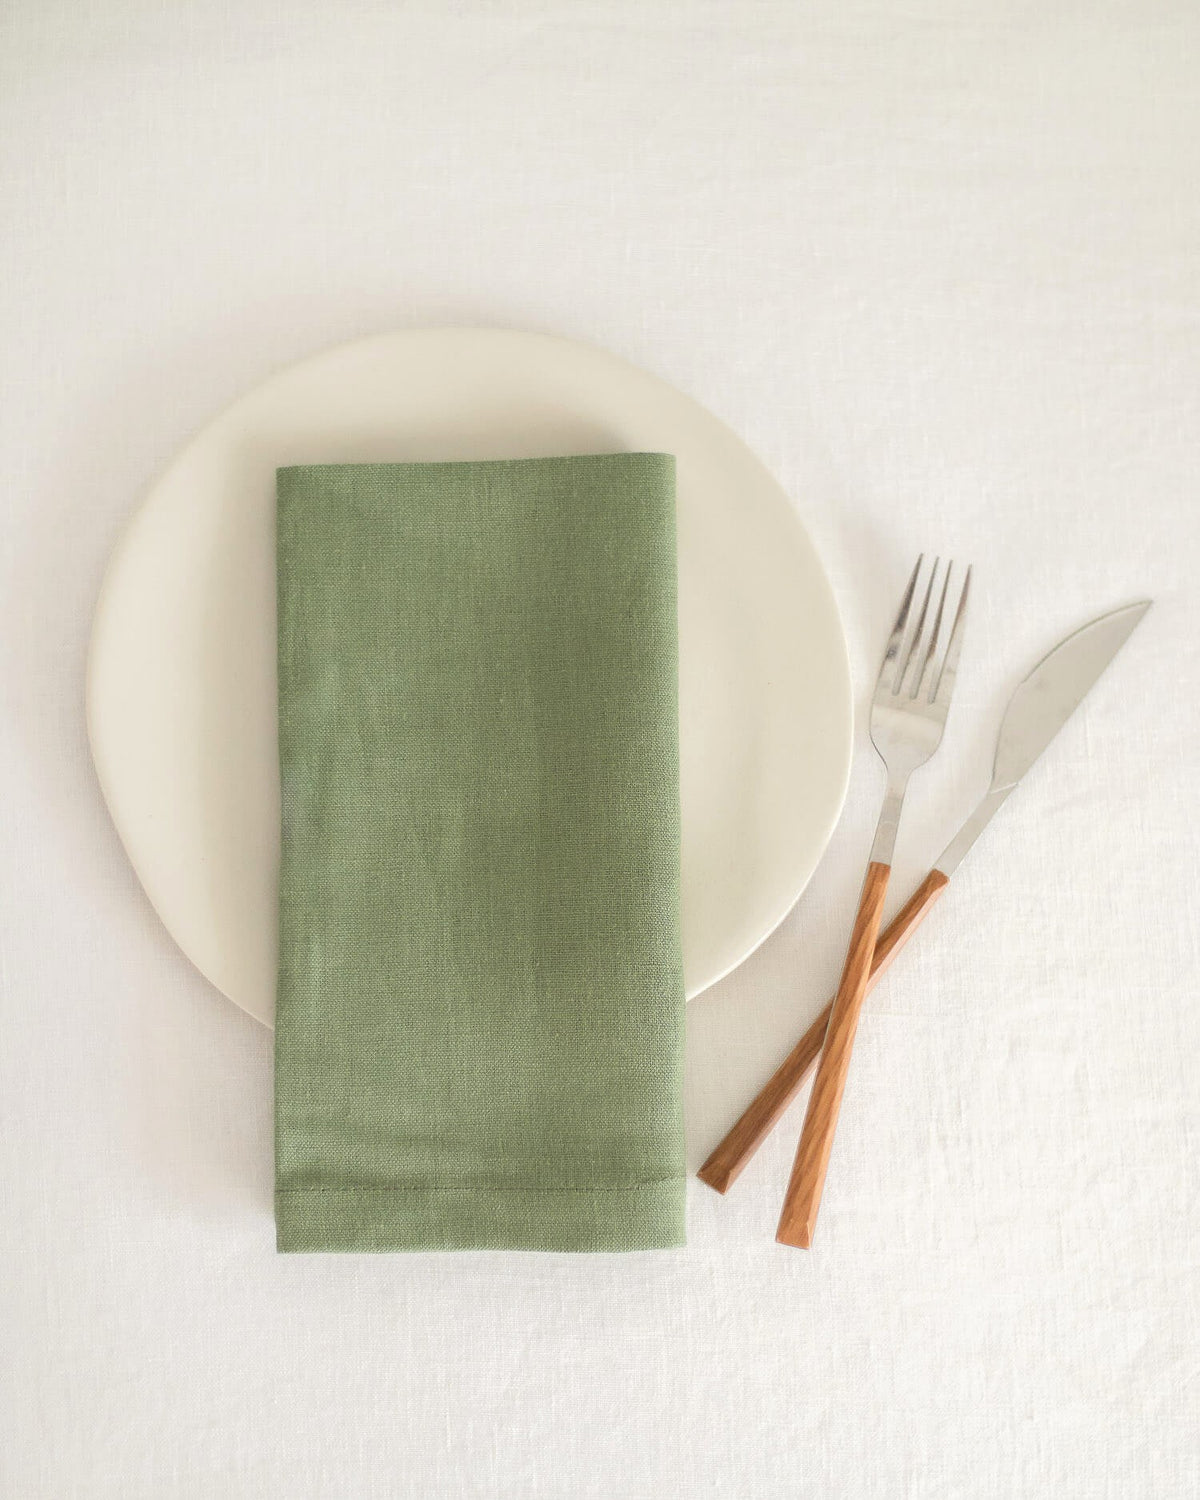 ava and ava ph sage green pure linen table napkin on off-white plate, folded into rectangular shape, with wooden spoon and fork